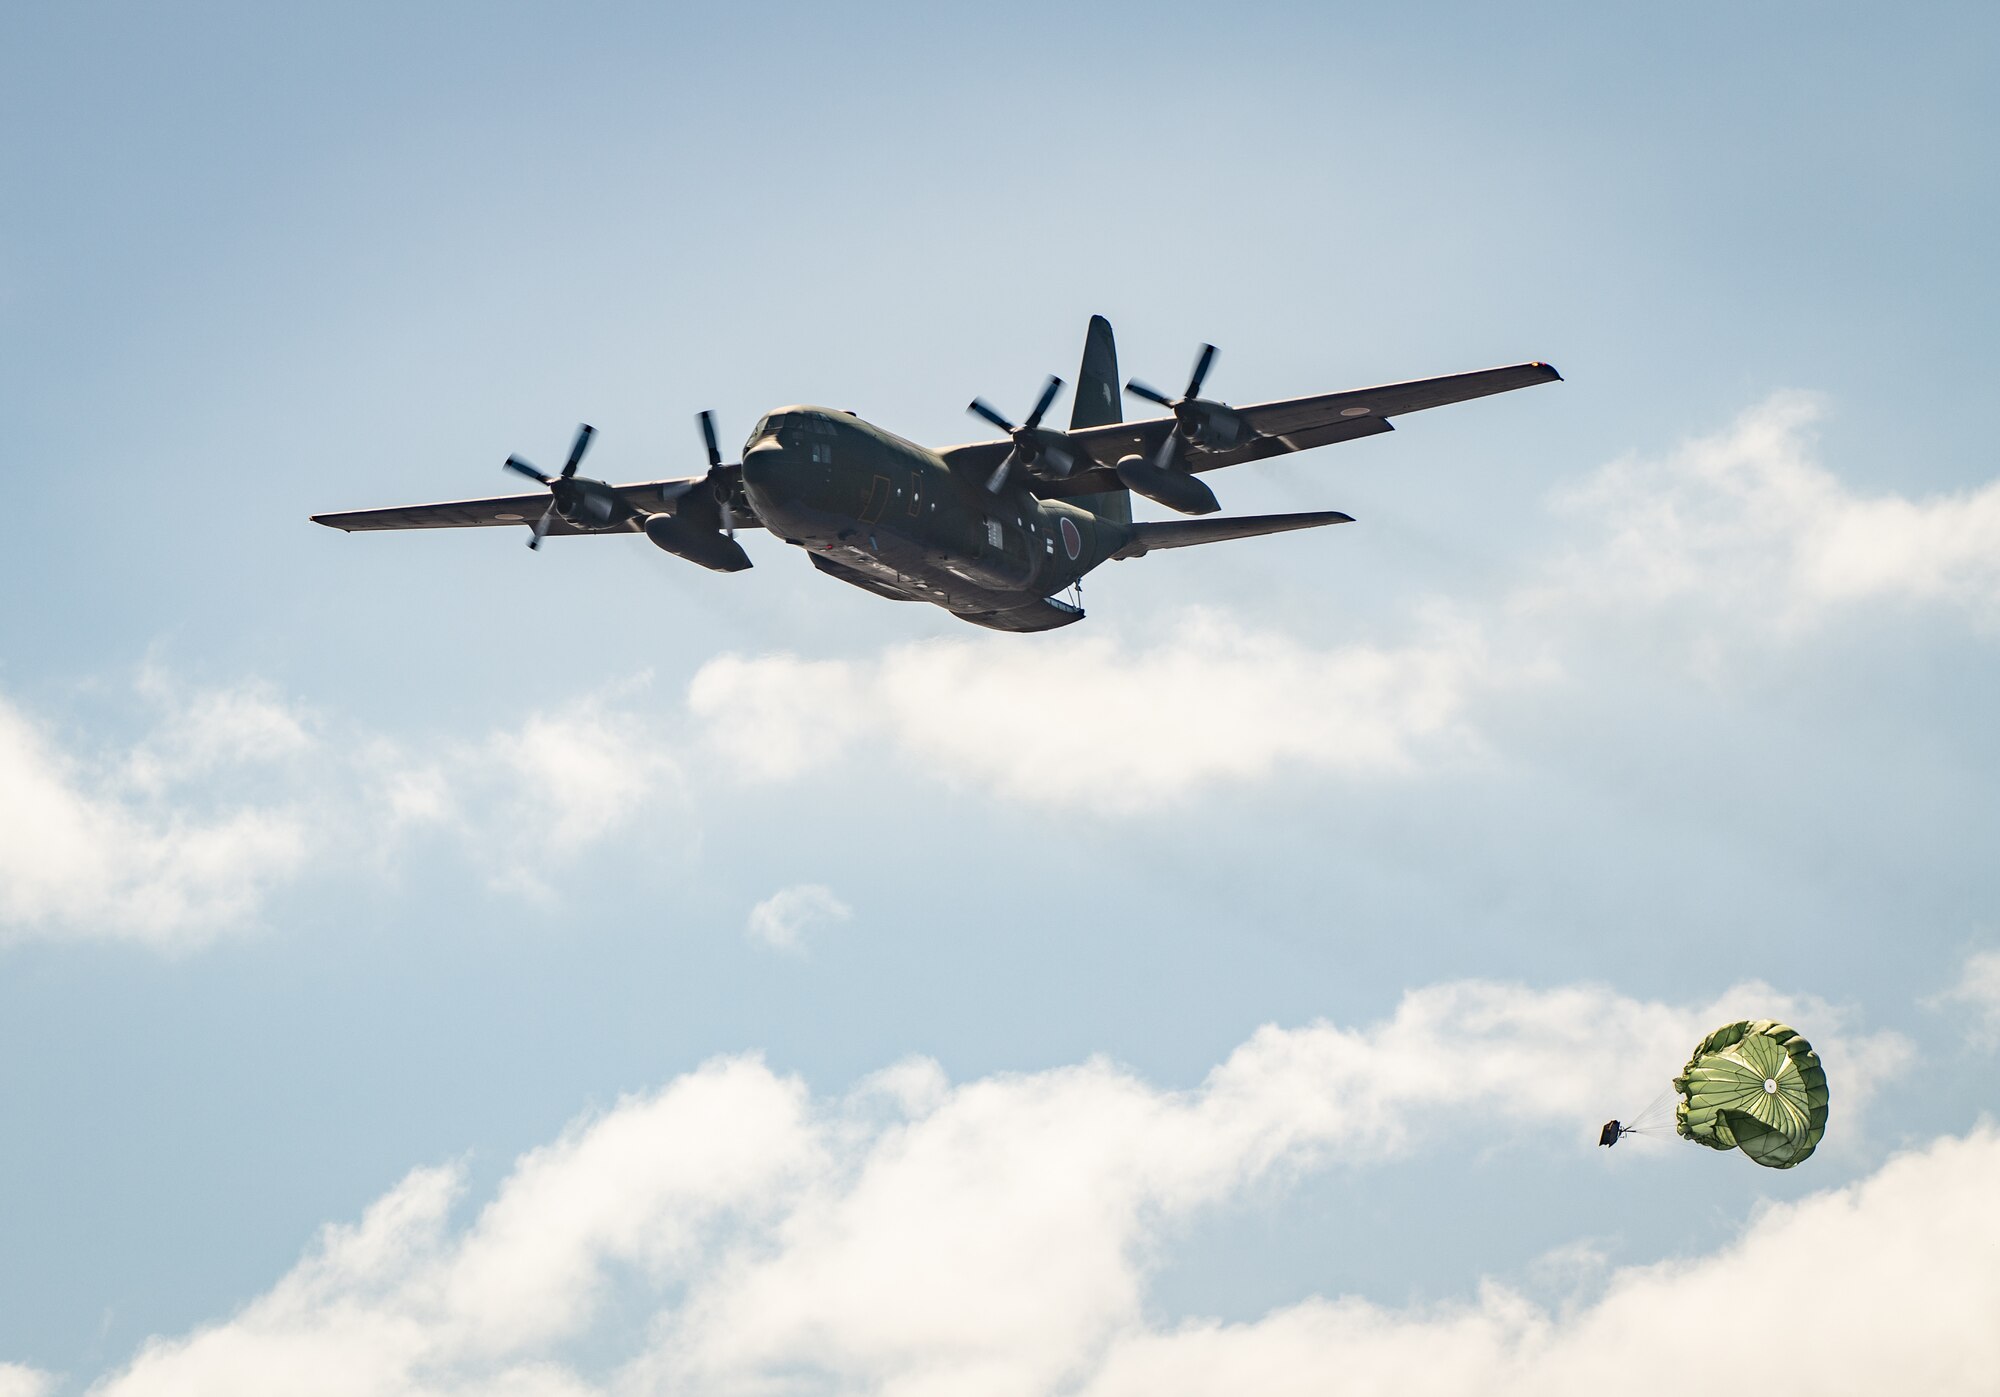 A Japan Air Self Defense Force C-130H Hercules assigned to the 401st Tactical Airlift Squadron flies over a drop zone during practice airdrop operations near Andersen Air Force Base